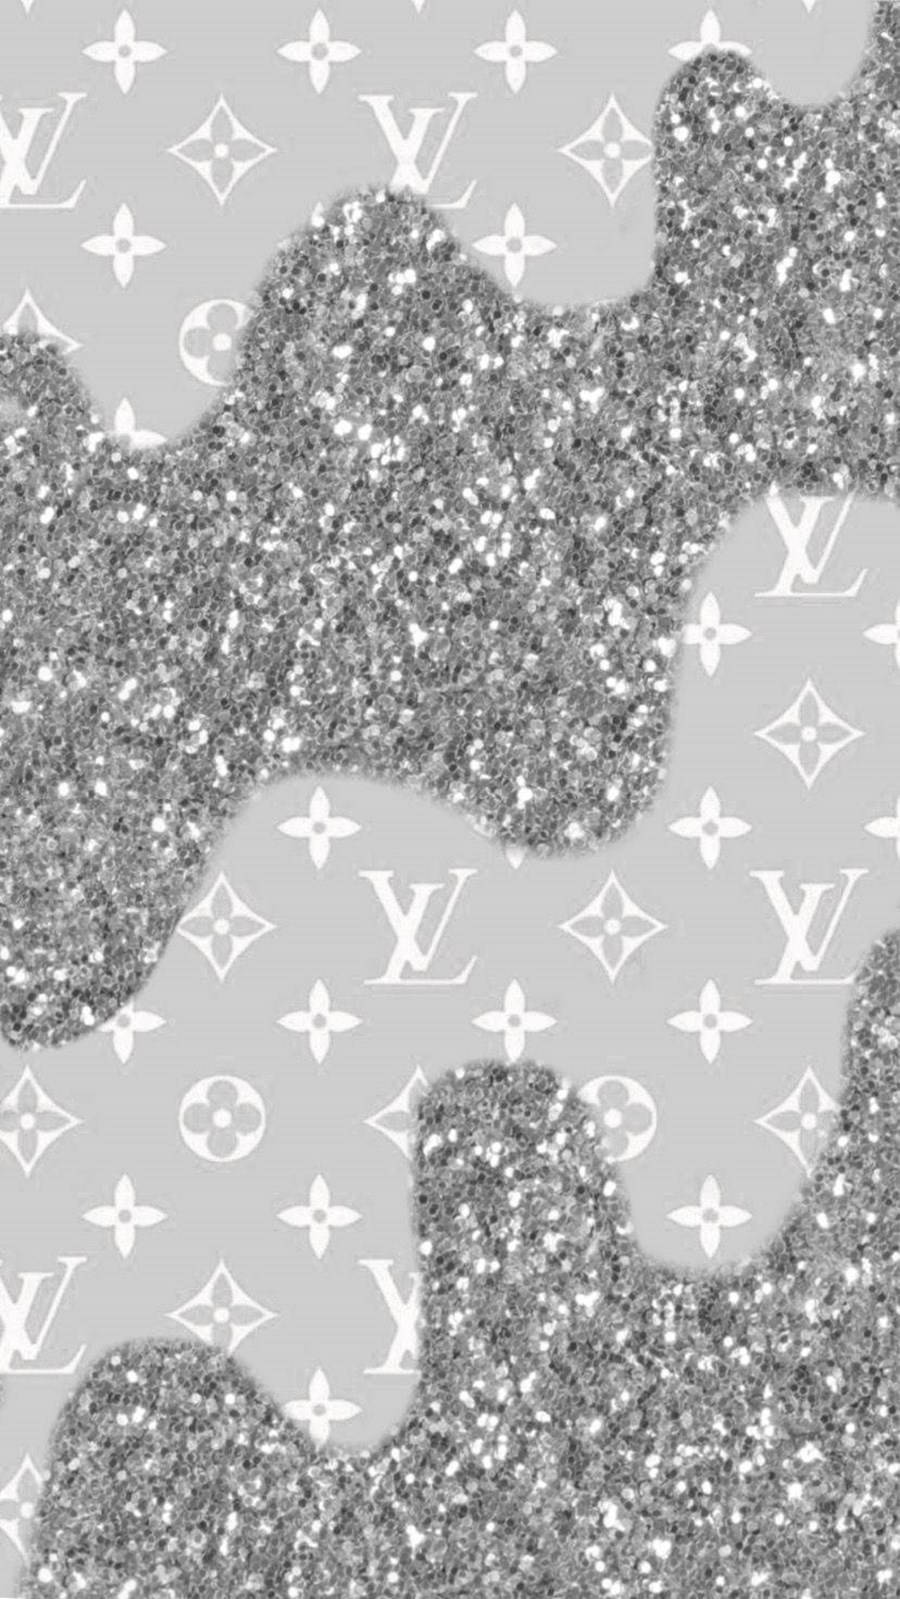 Download Louis Vuitton Aesthetic Blue And White Wallpaper